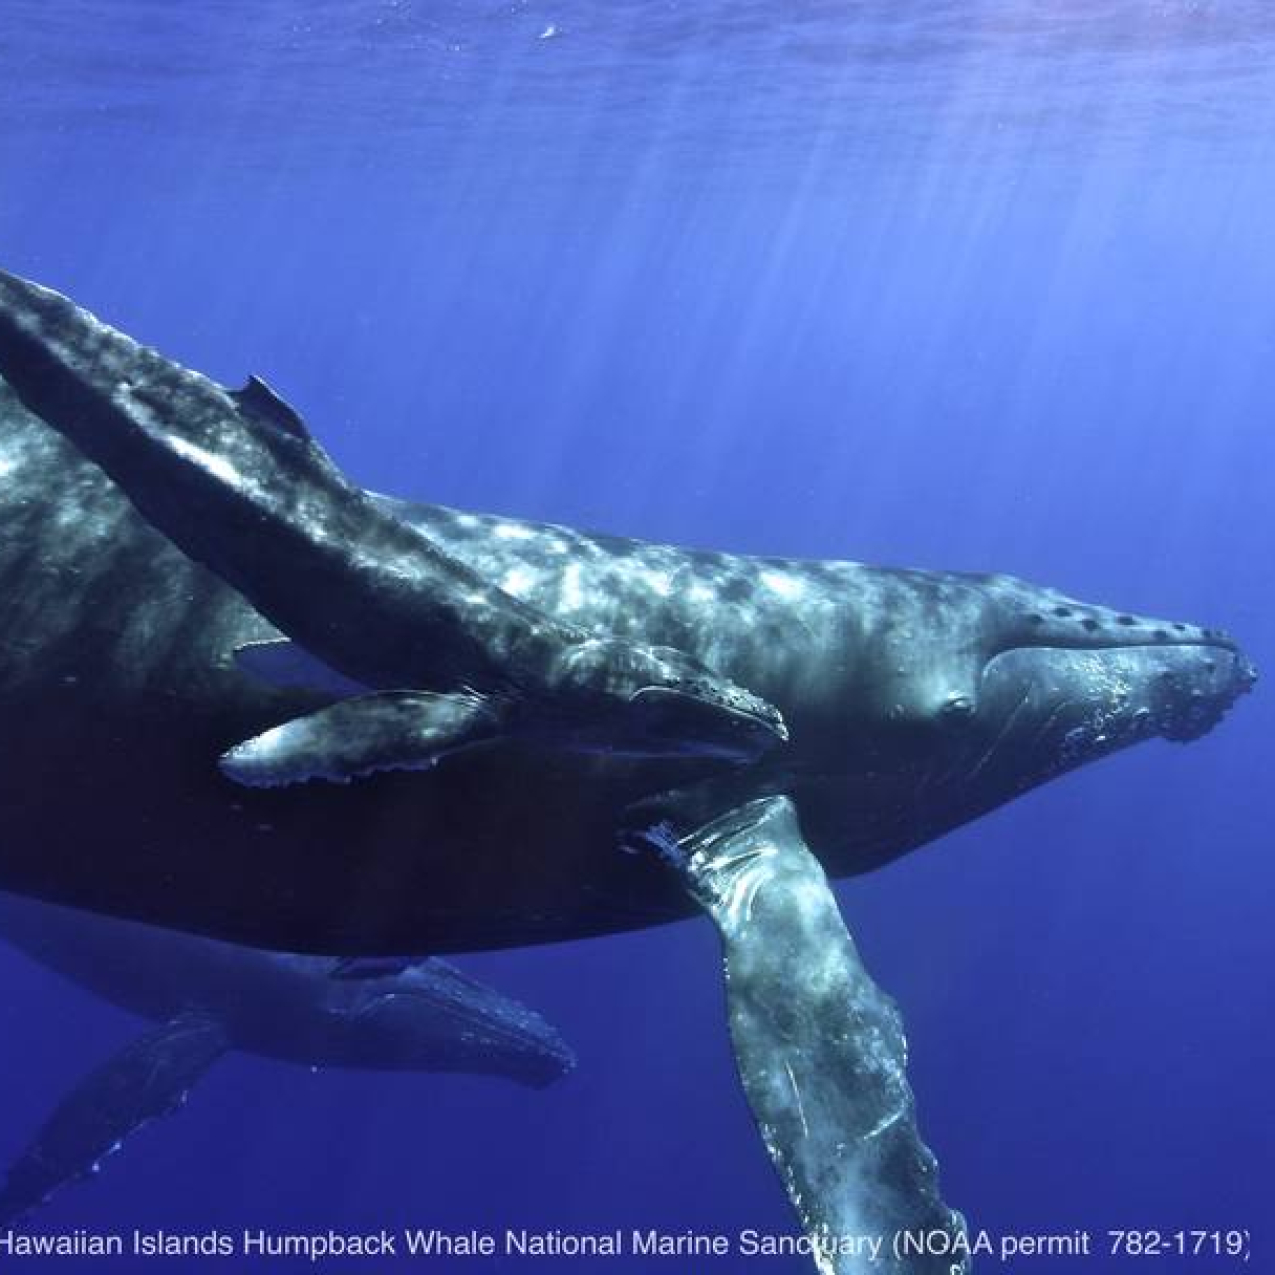 A humpback whale mother and calf in Hawaiian waters.